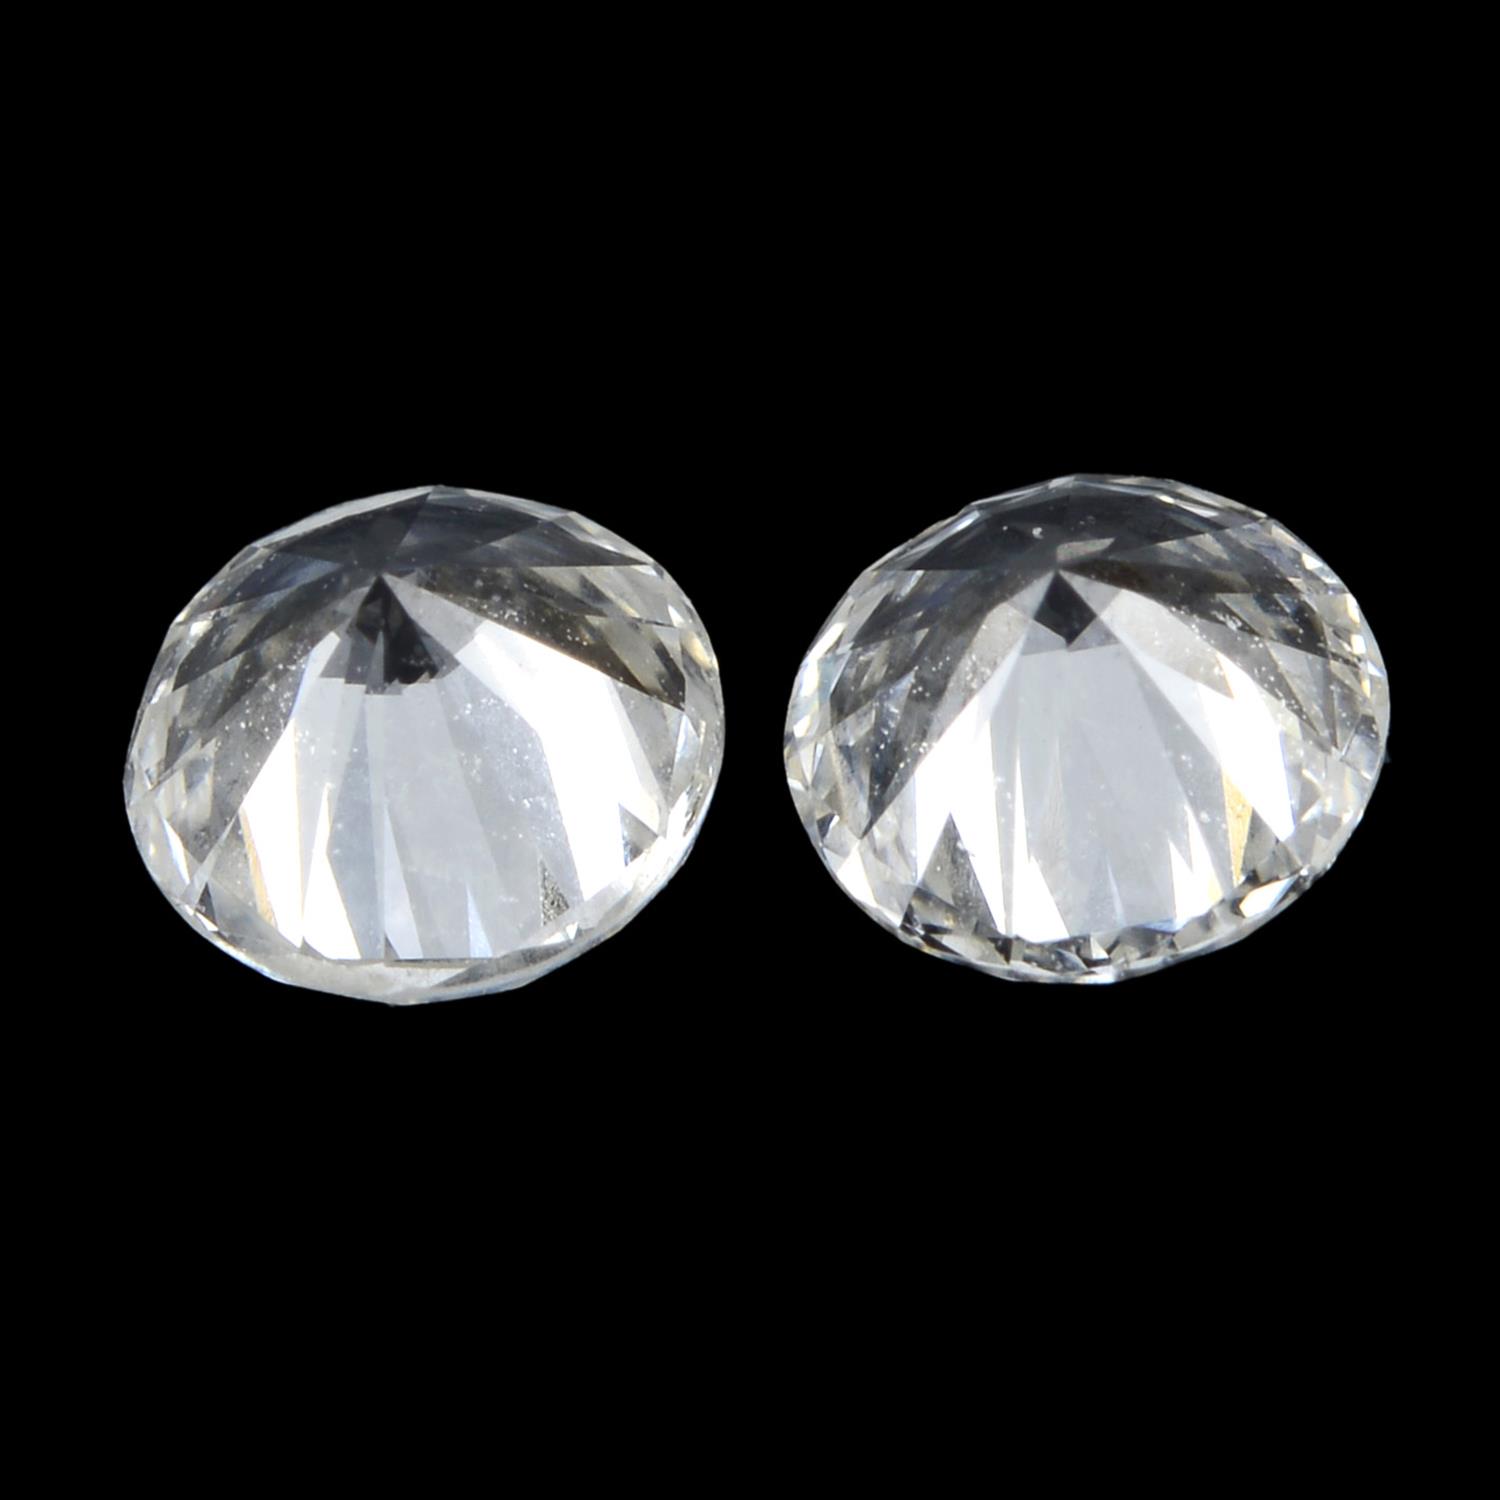 Pair of brilliant cut diamonds weighing 0.55ct - Image 2 of 2